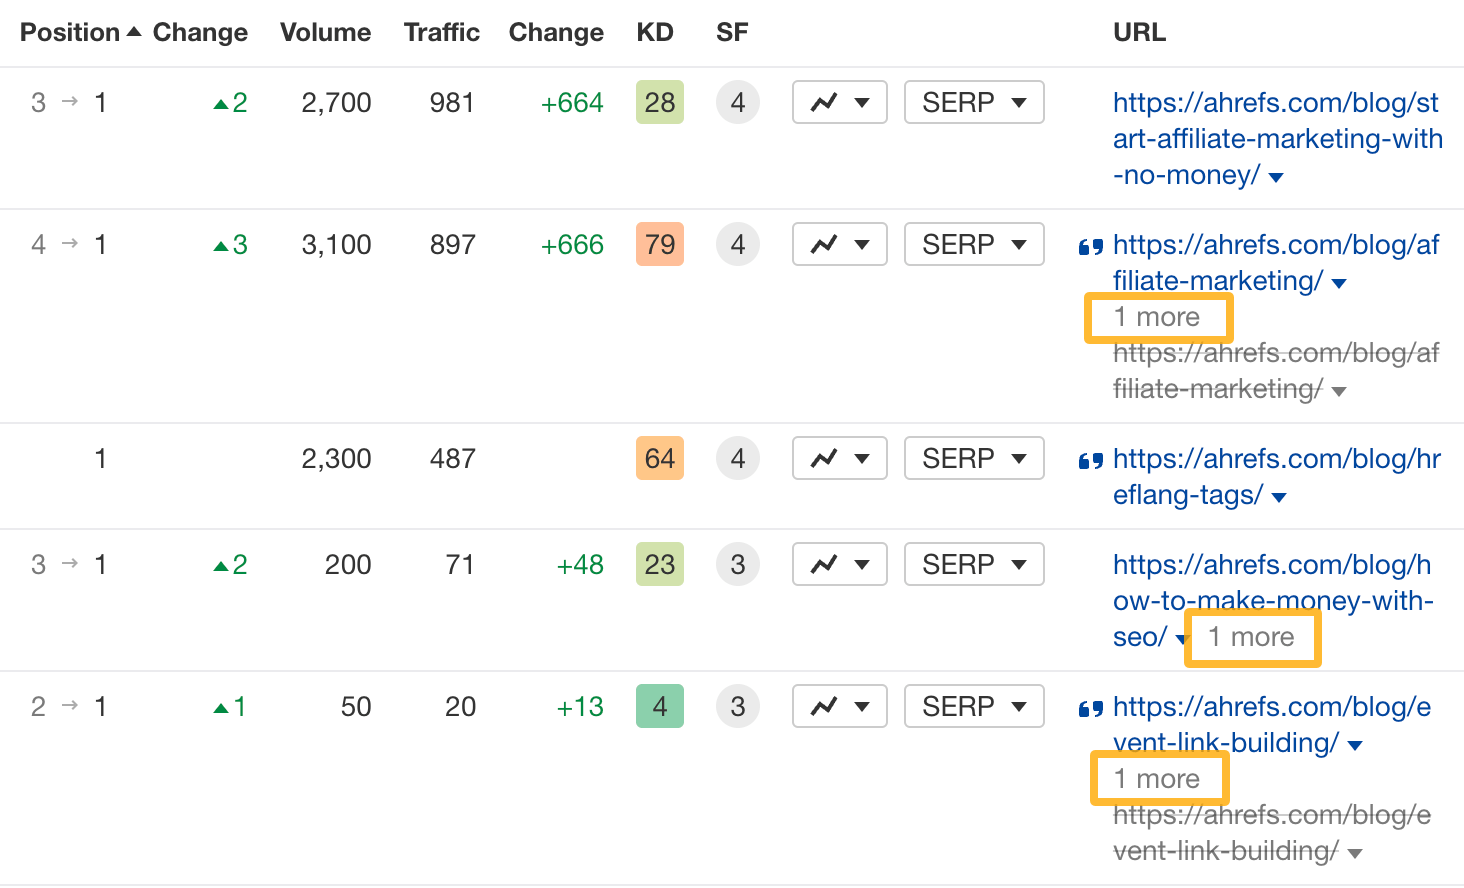 URL column shows number of ranking URLs in Rank Tracker Overview 2.0